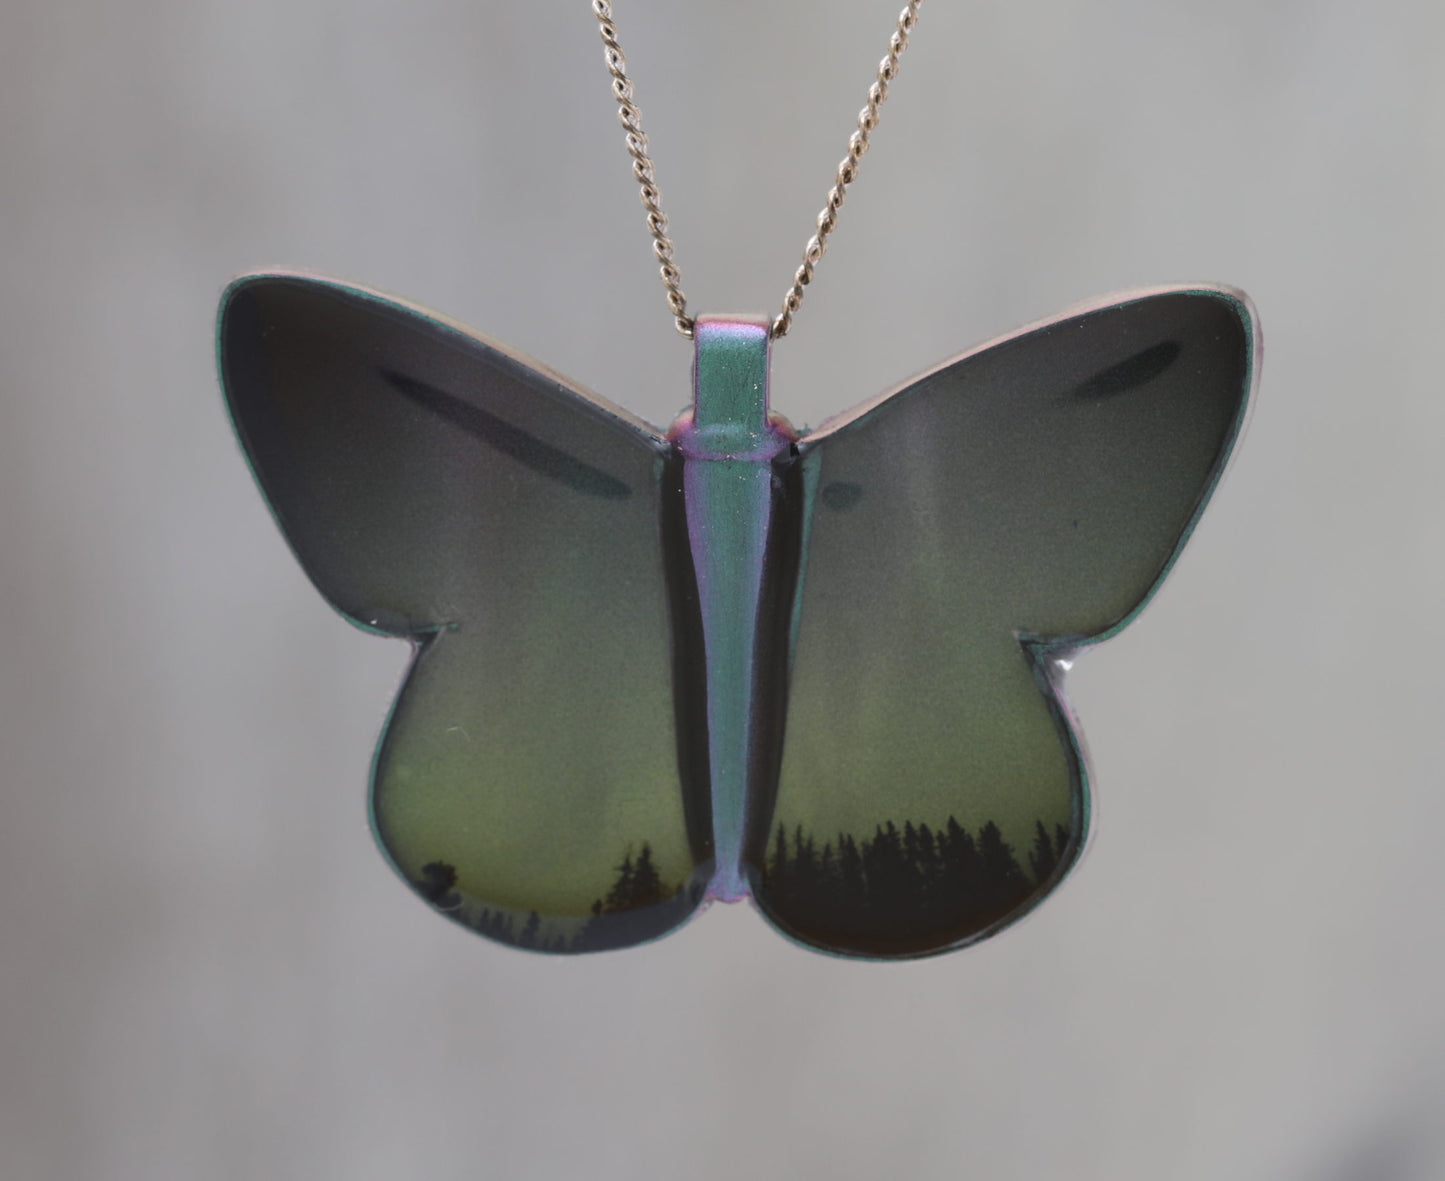 Northern Lights - Astronomy Butterfly Pendant made with a photo of the Aurora